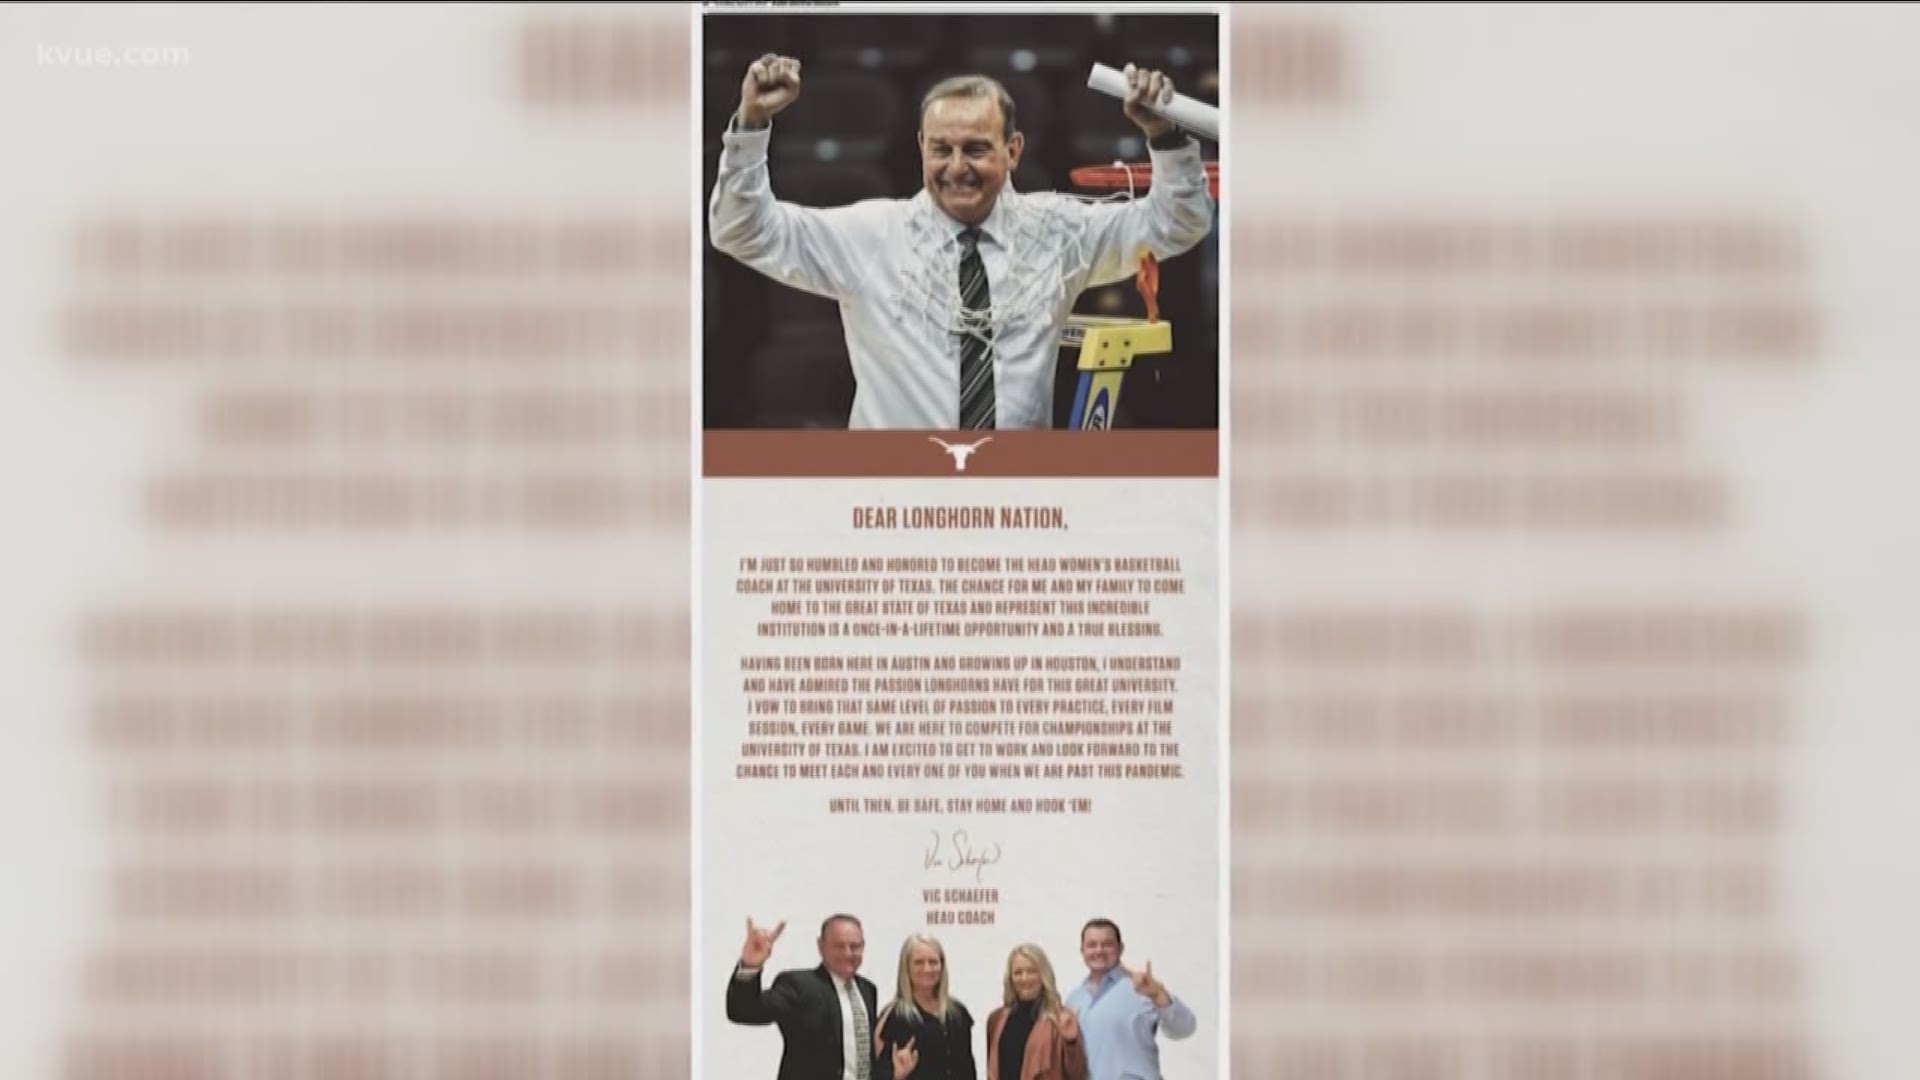 Schaefer took out a full-page ad thanking the university for hiring him as the new women's basketball coach.